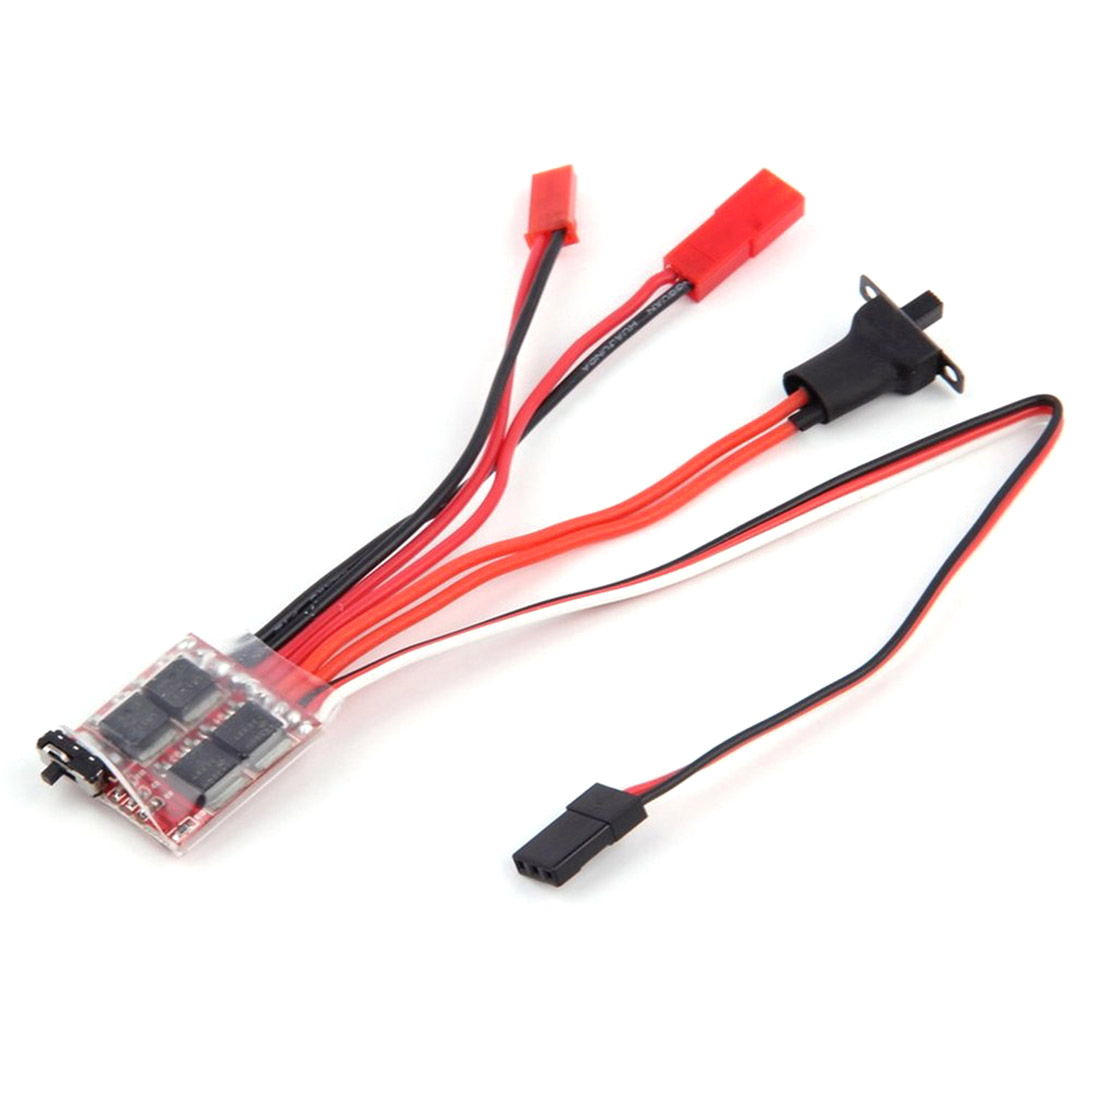 JMT 20A 30A Brush ESC 2KHz Forward Reverse Bidirectional Speed Controller with Brake 30*23*5mm for RC Boat Car Tank Rock Crawlers 20A with Brake